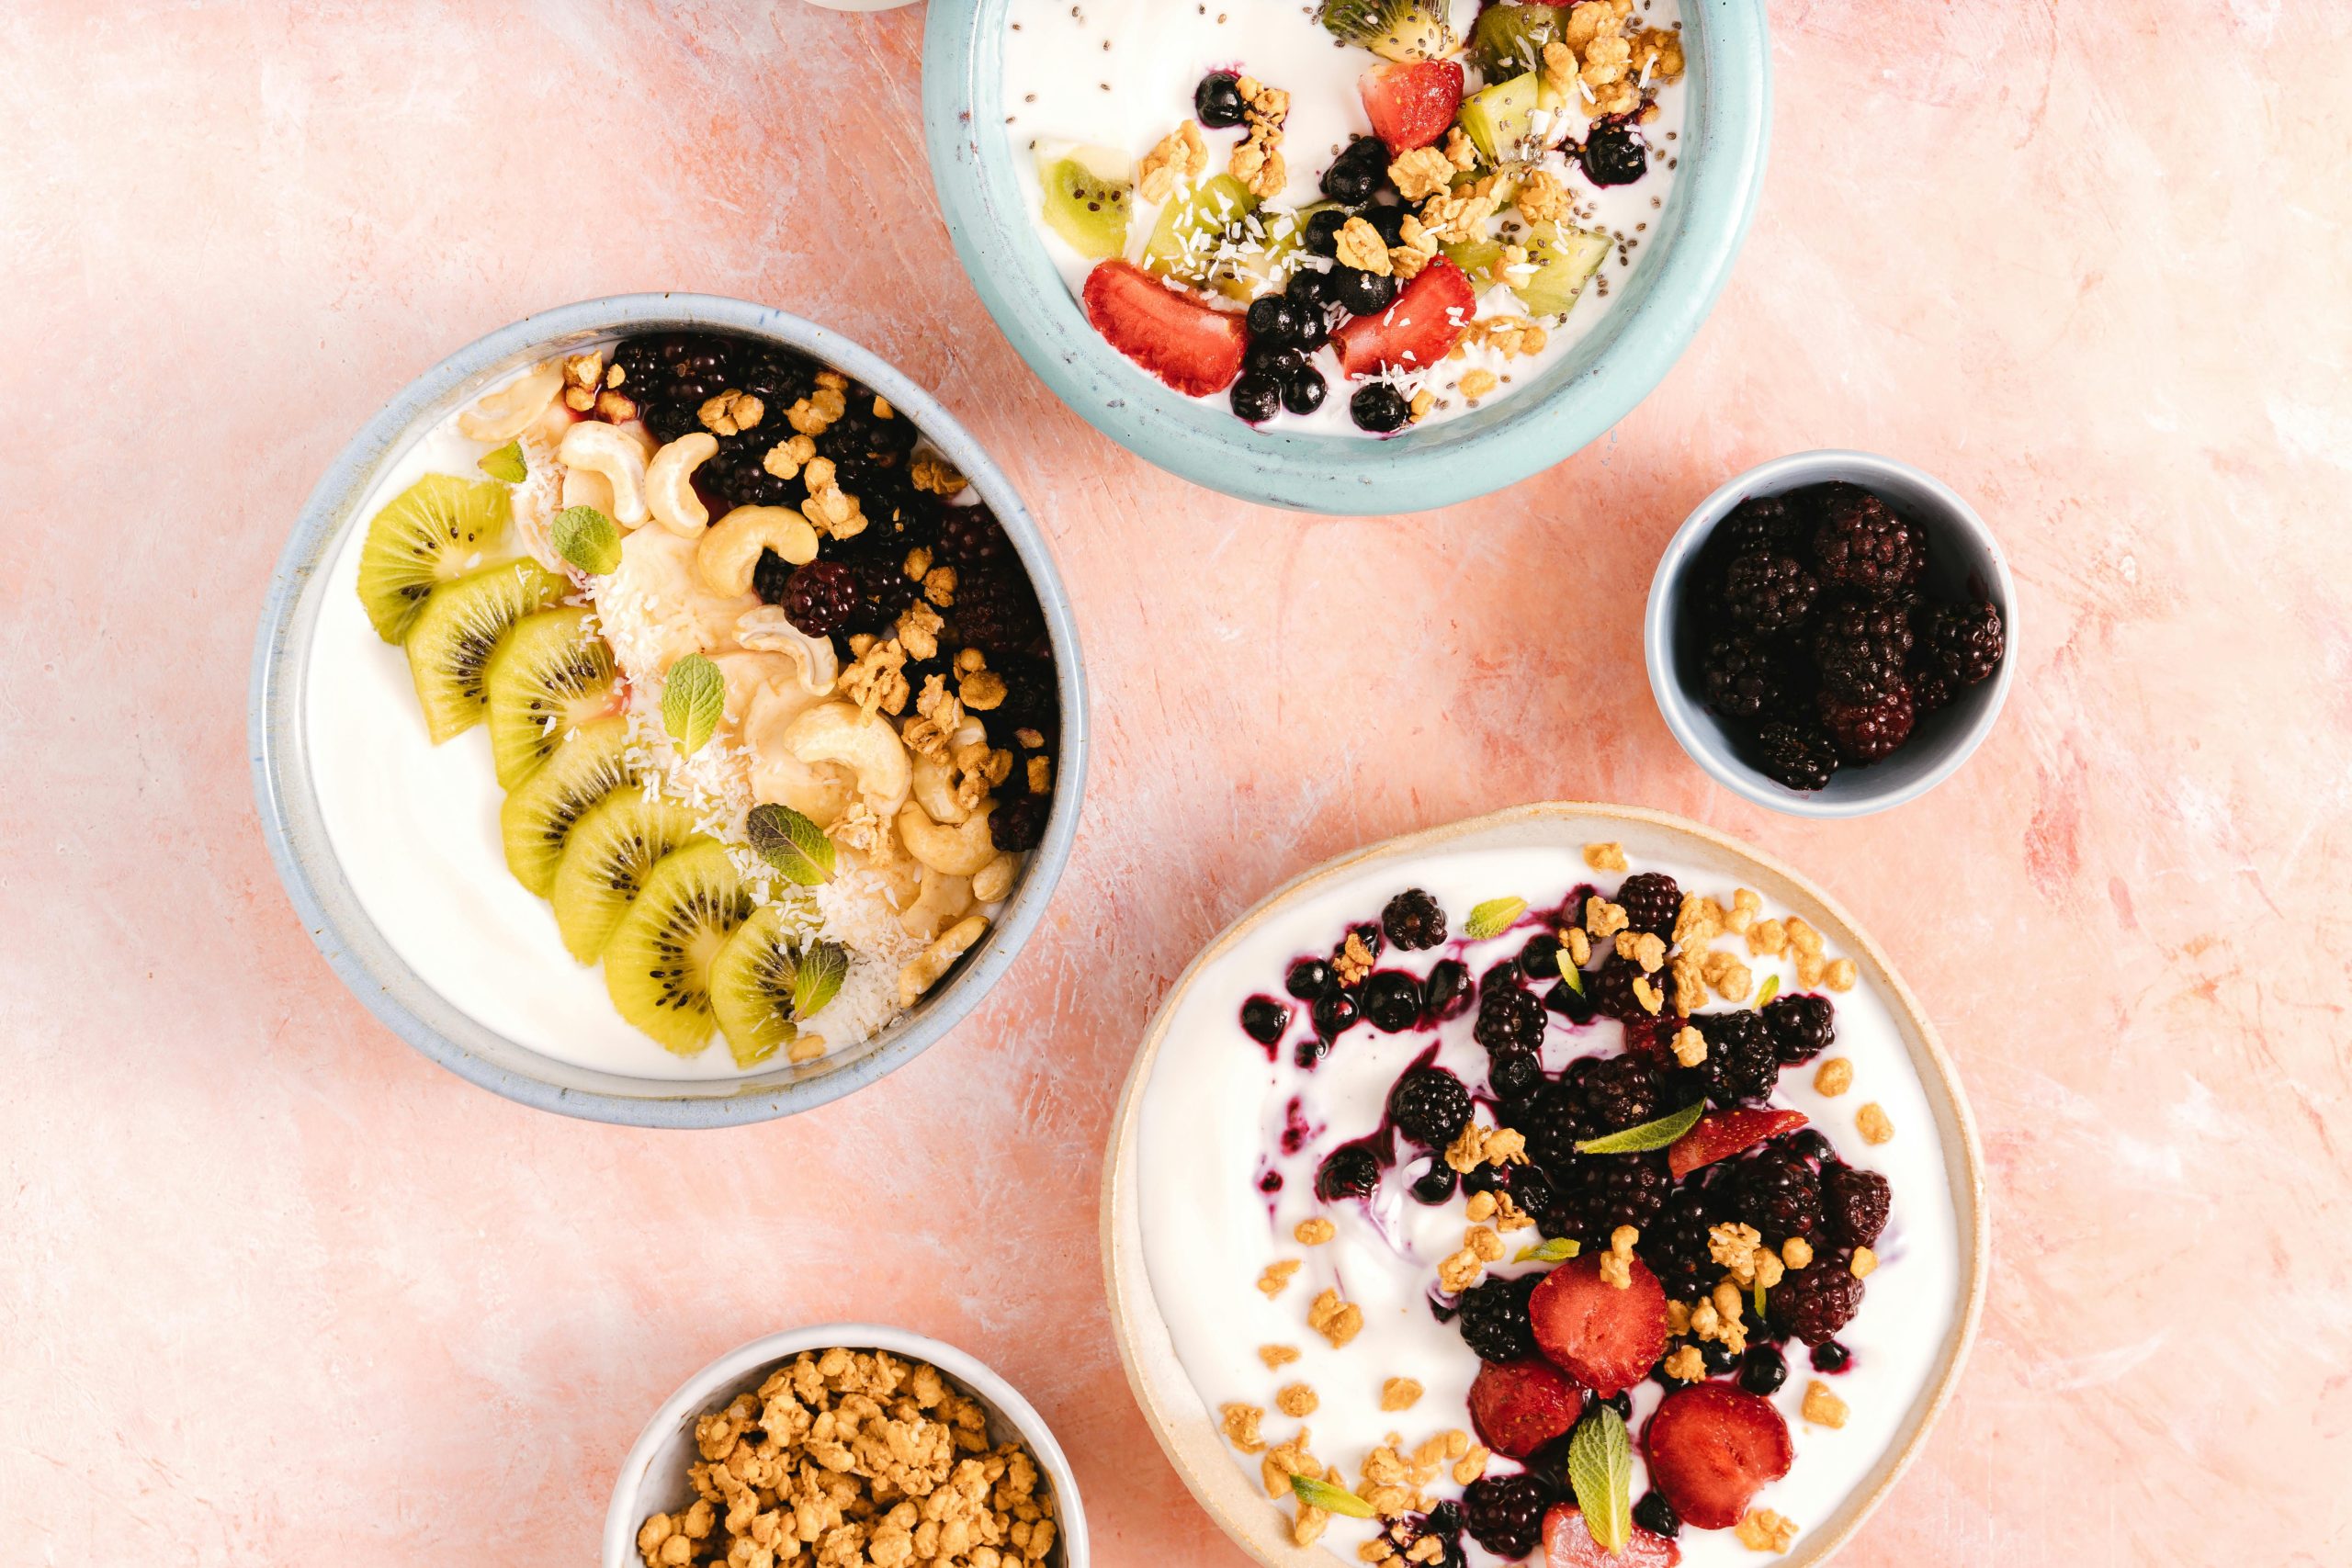 Bowls of probiotic-rich yogurt with various toppings